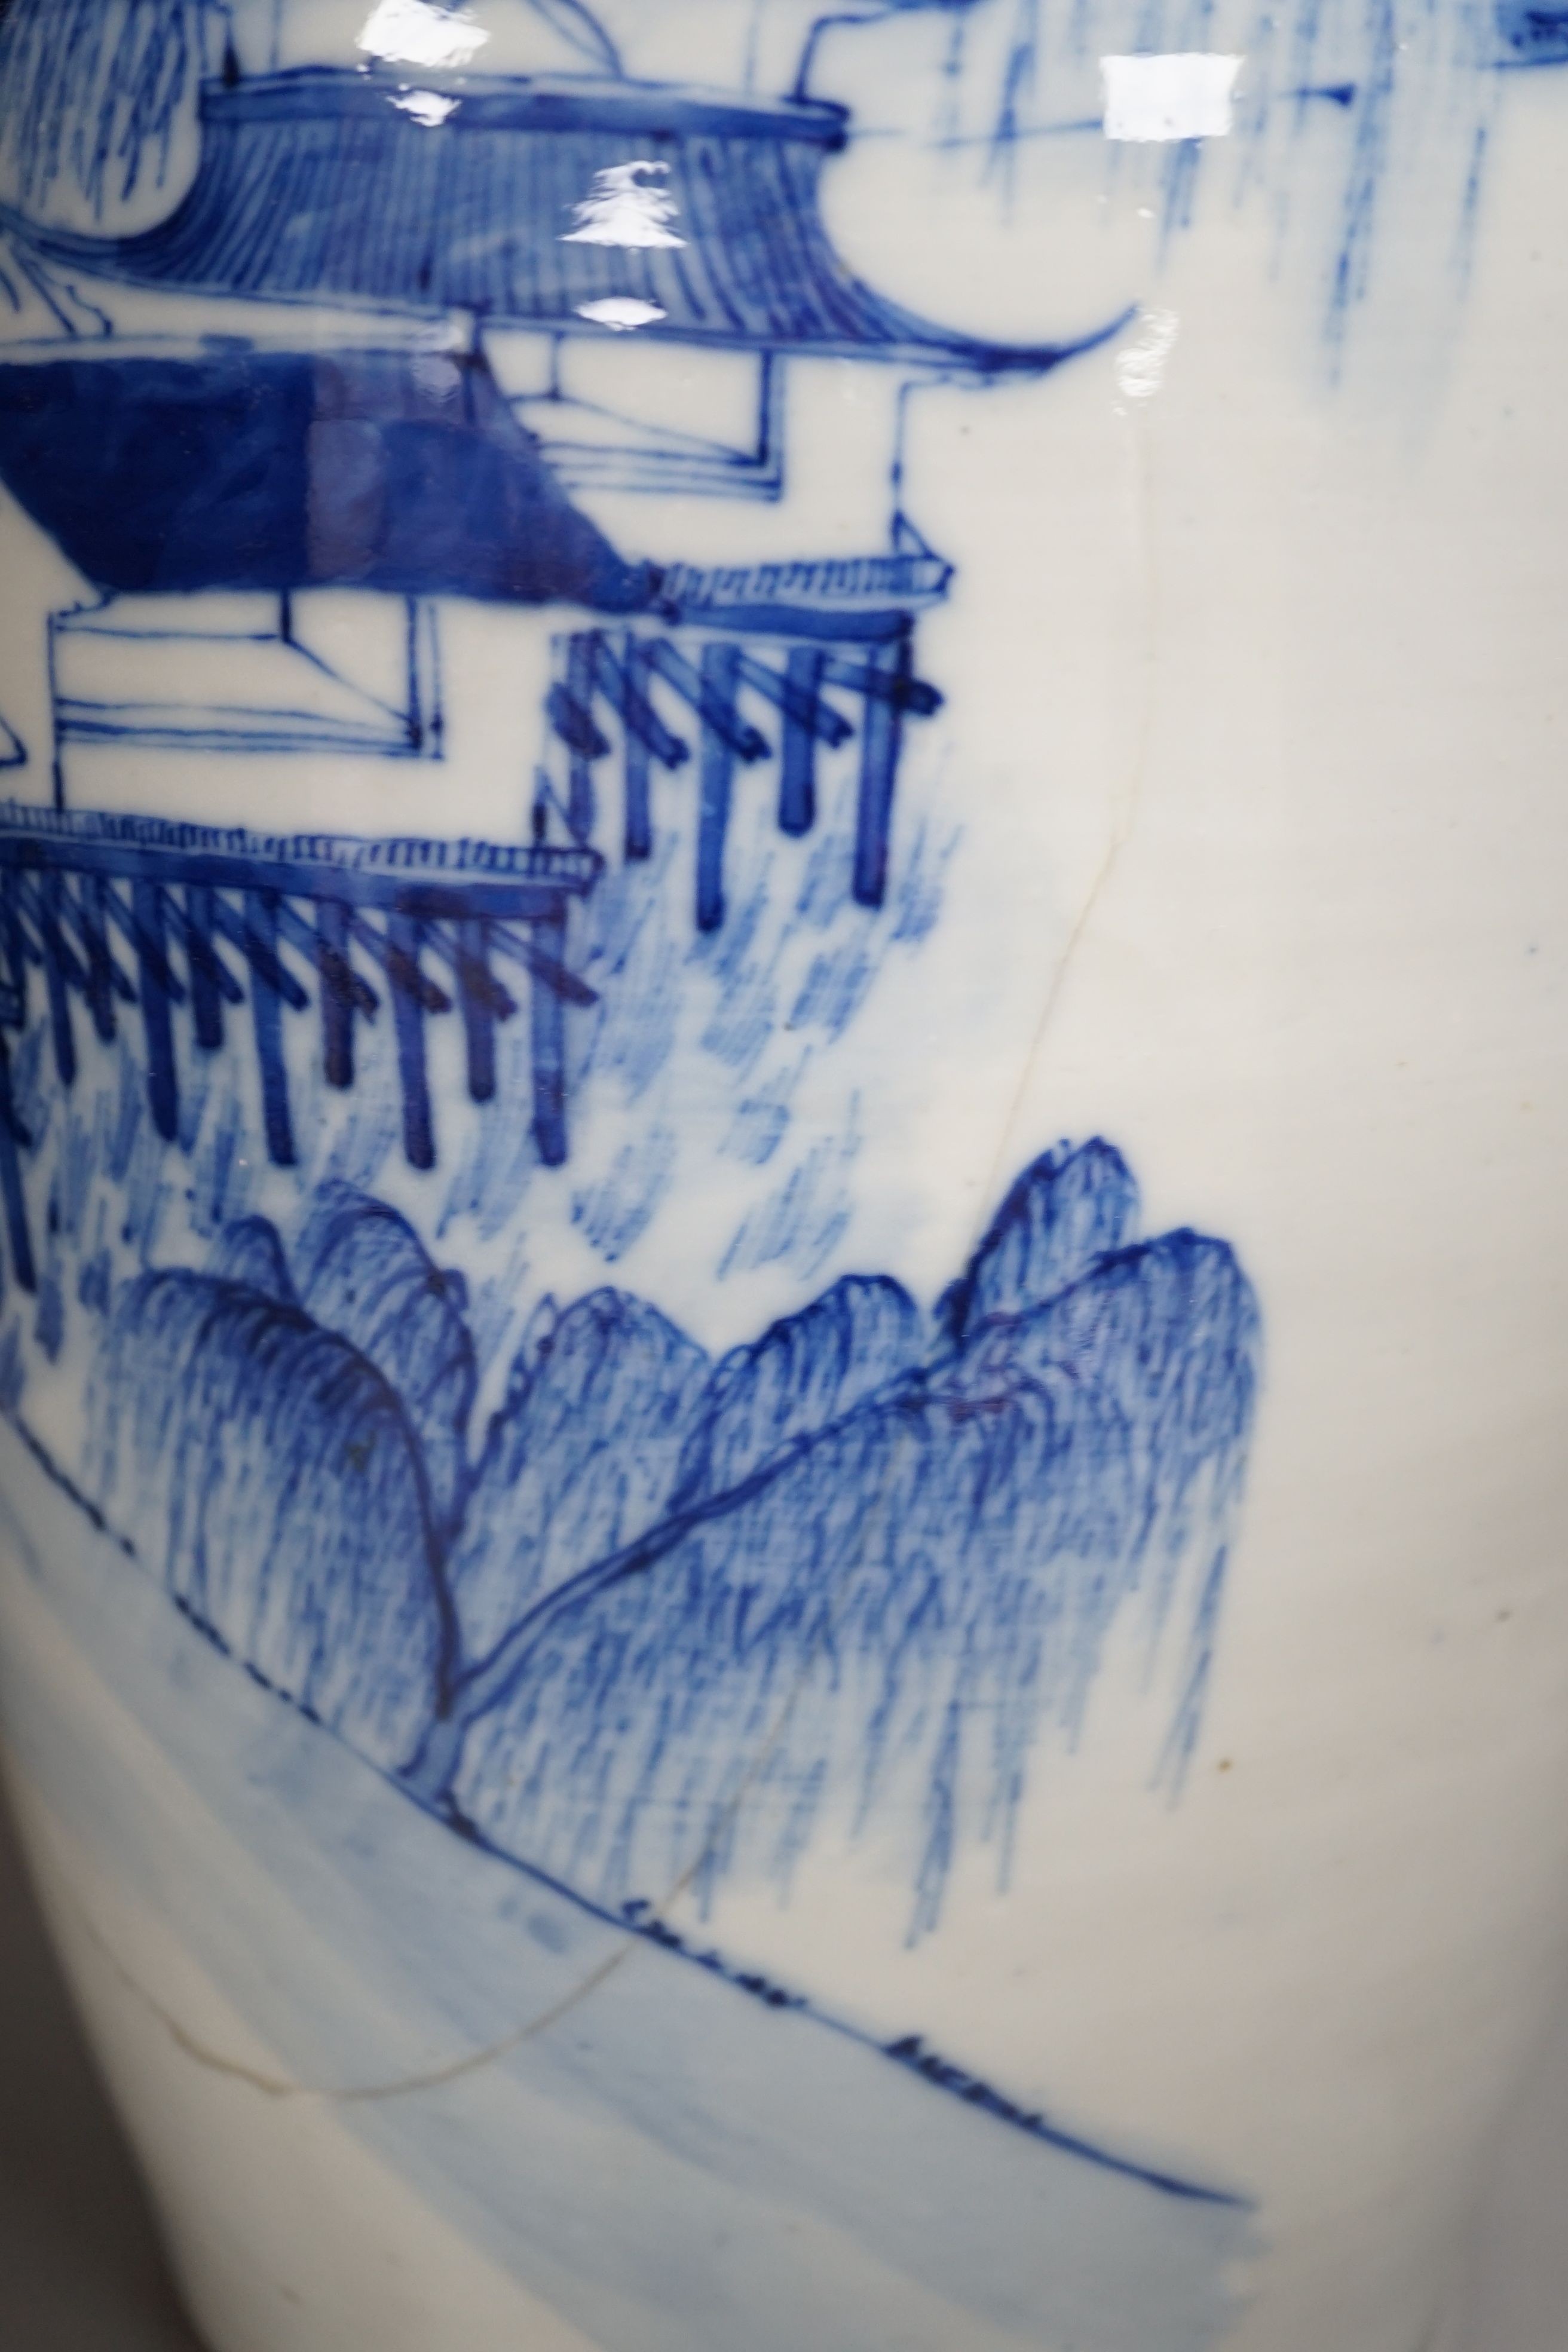 An early 20th century Chinese blue and white landscape vase converted to a lamp, total height 58cm